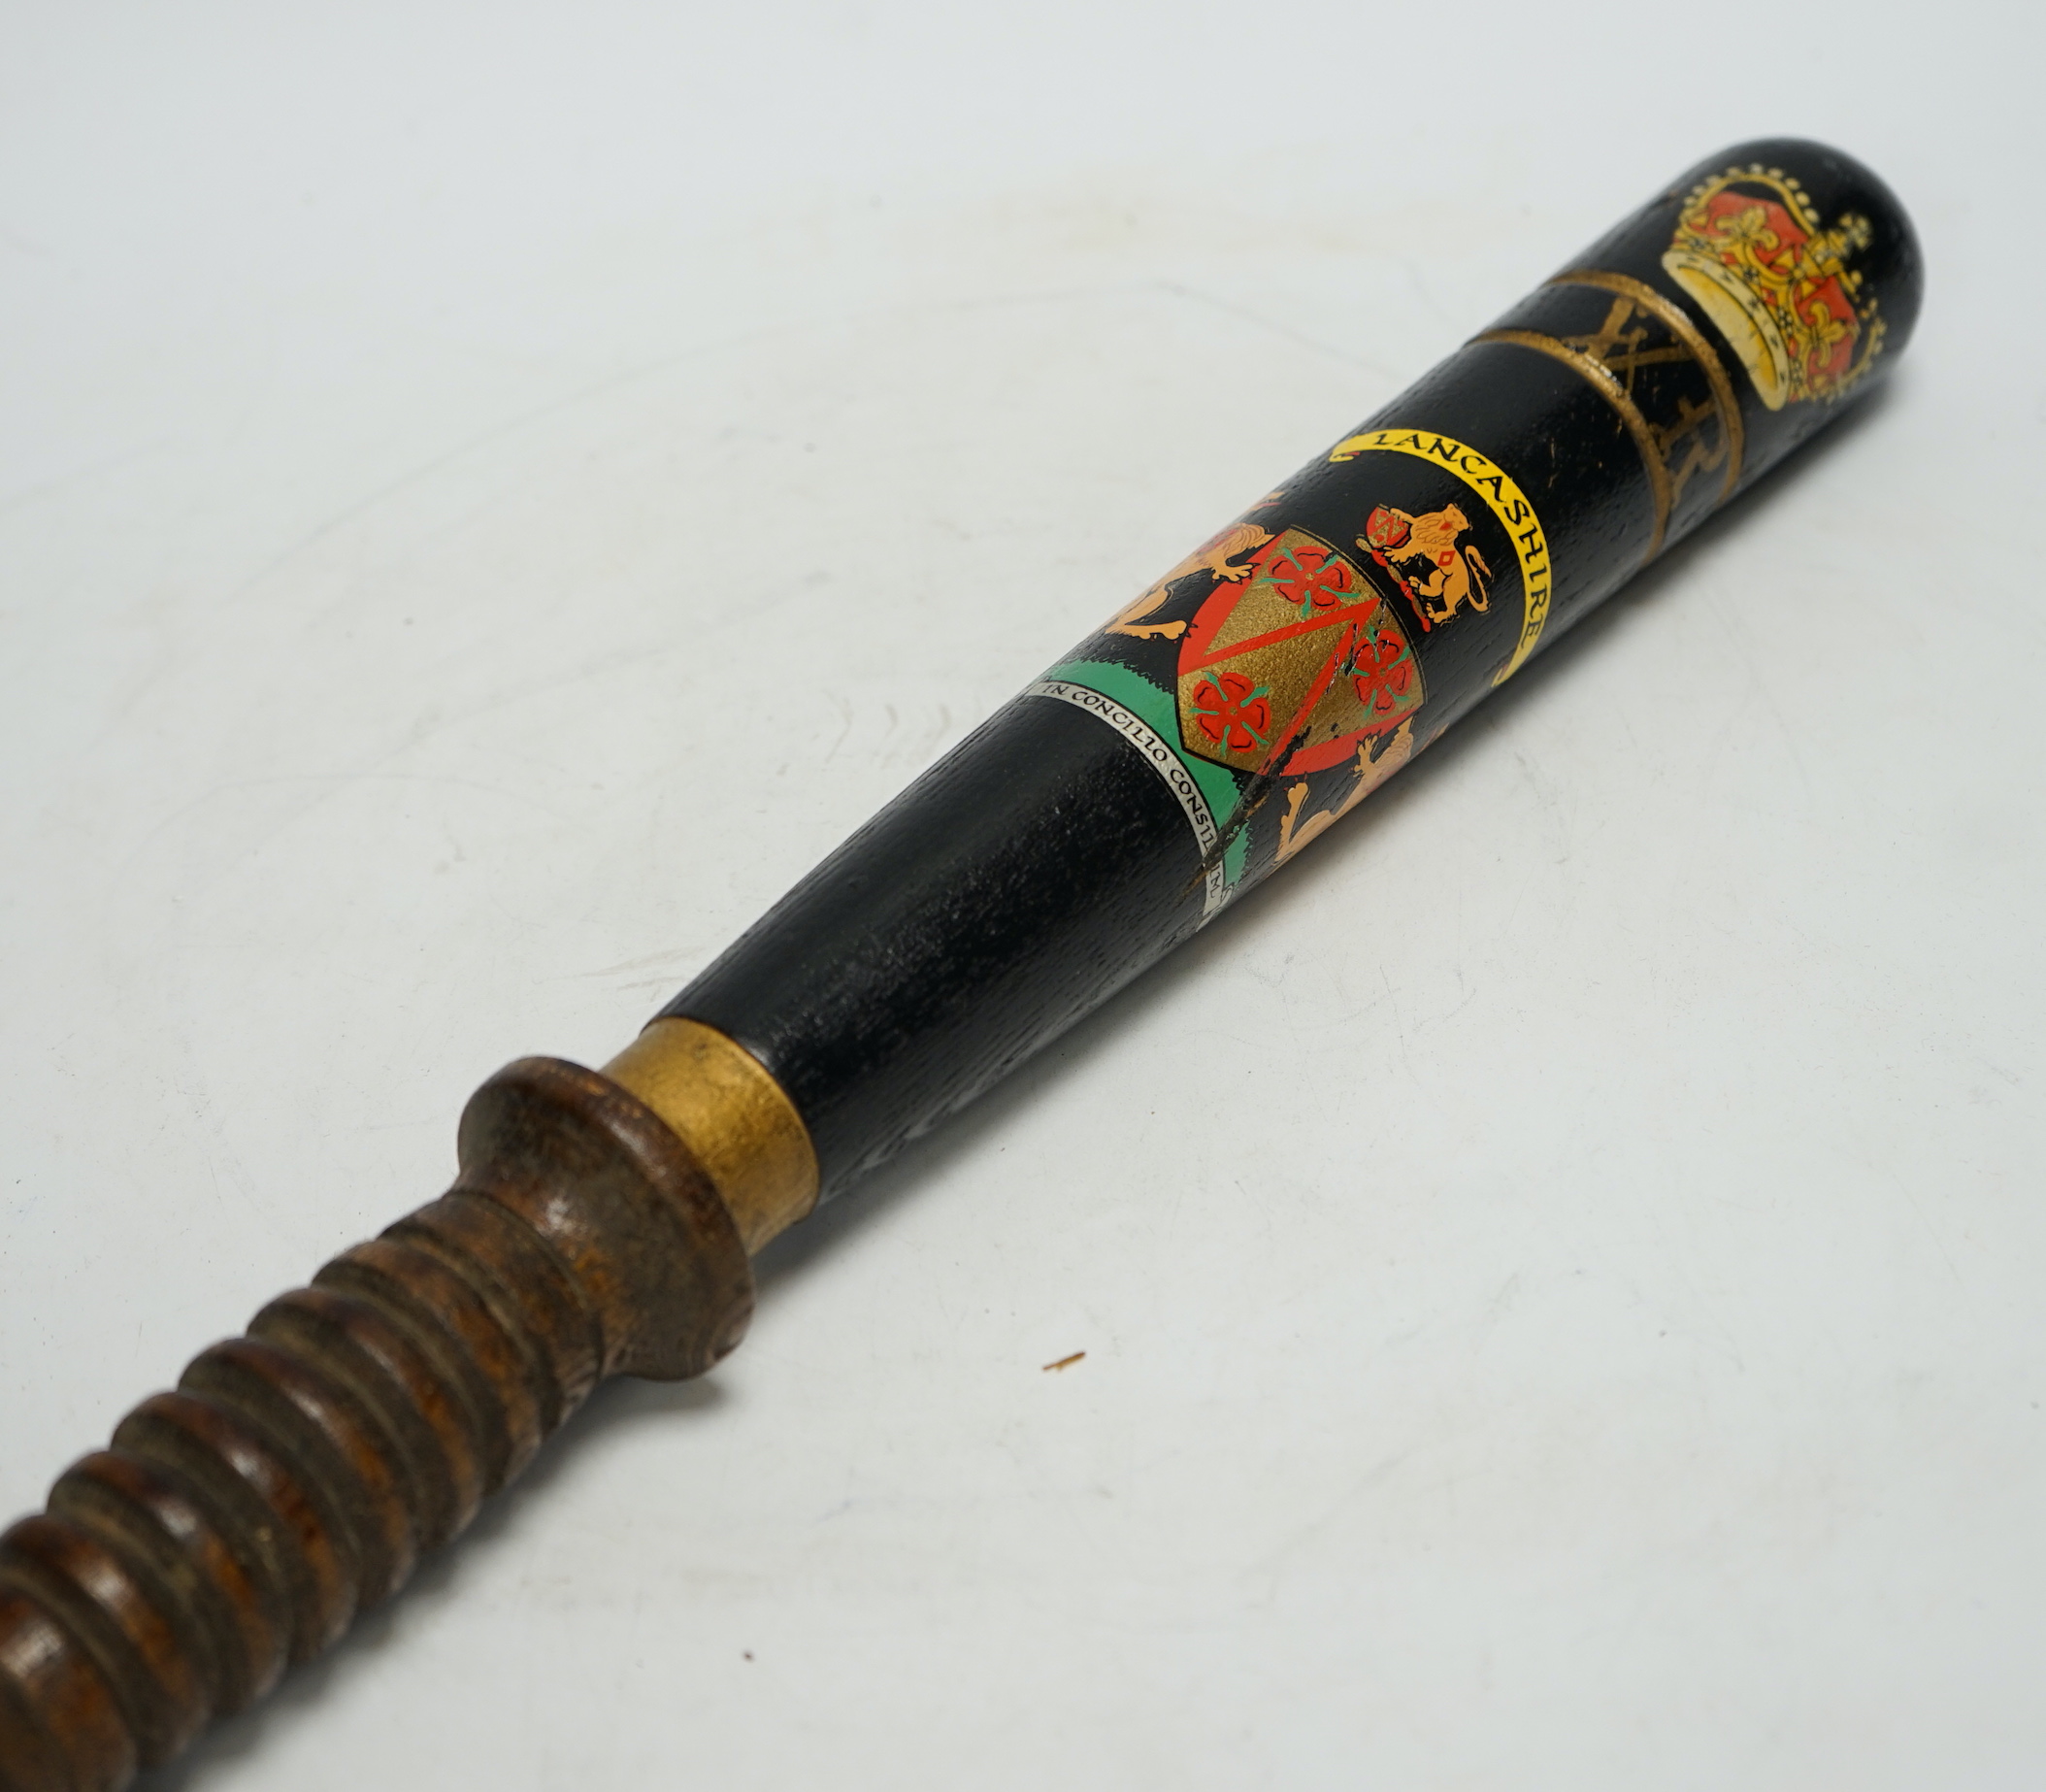 Re-painted Lancashire police truncheon, 45cm in length